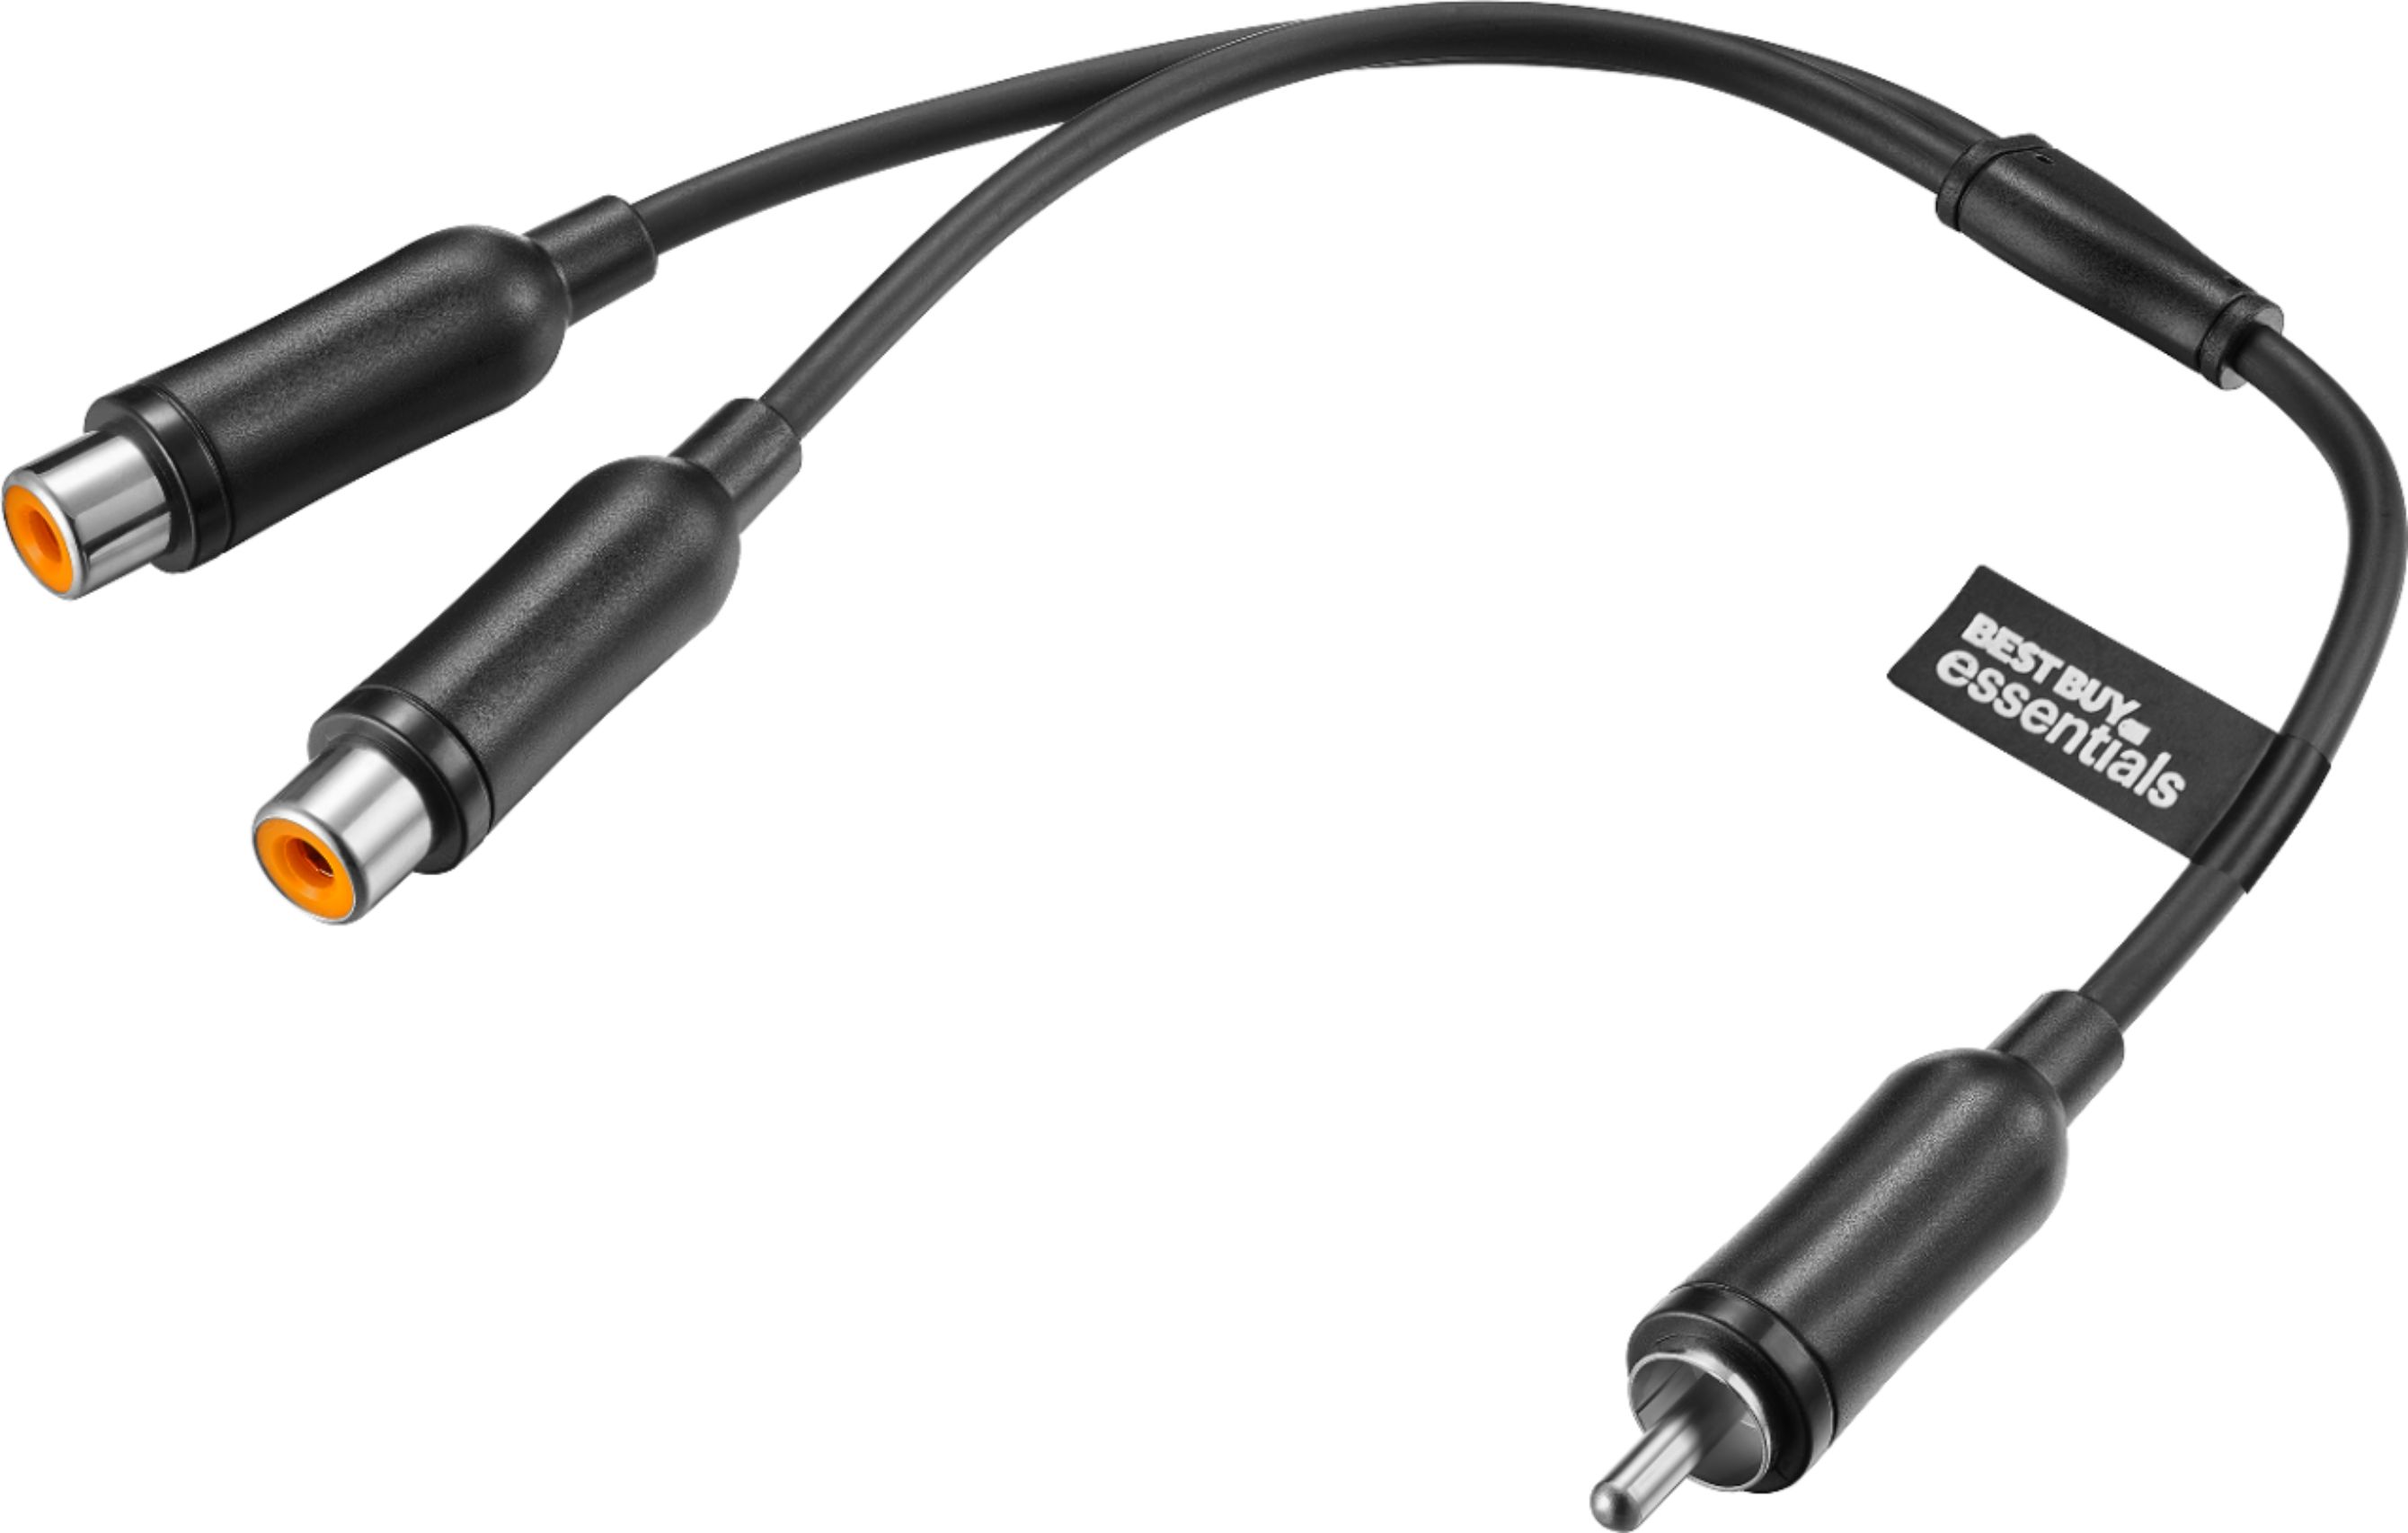 Stereo 3.5mm Plug to Two RCA Jacks Audio Adapter Cable 6 inches